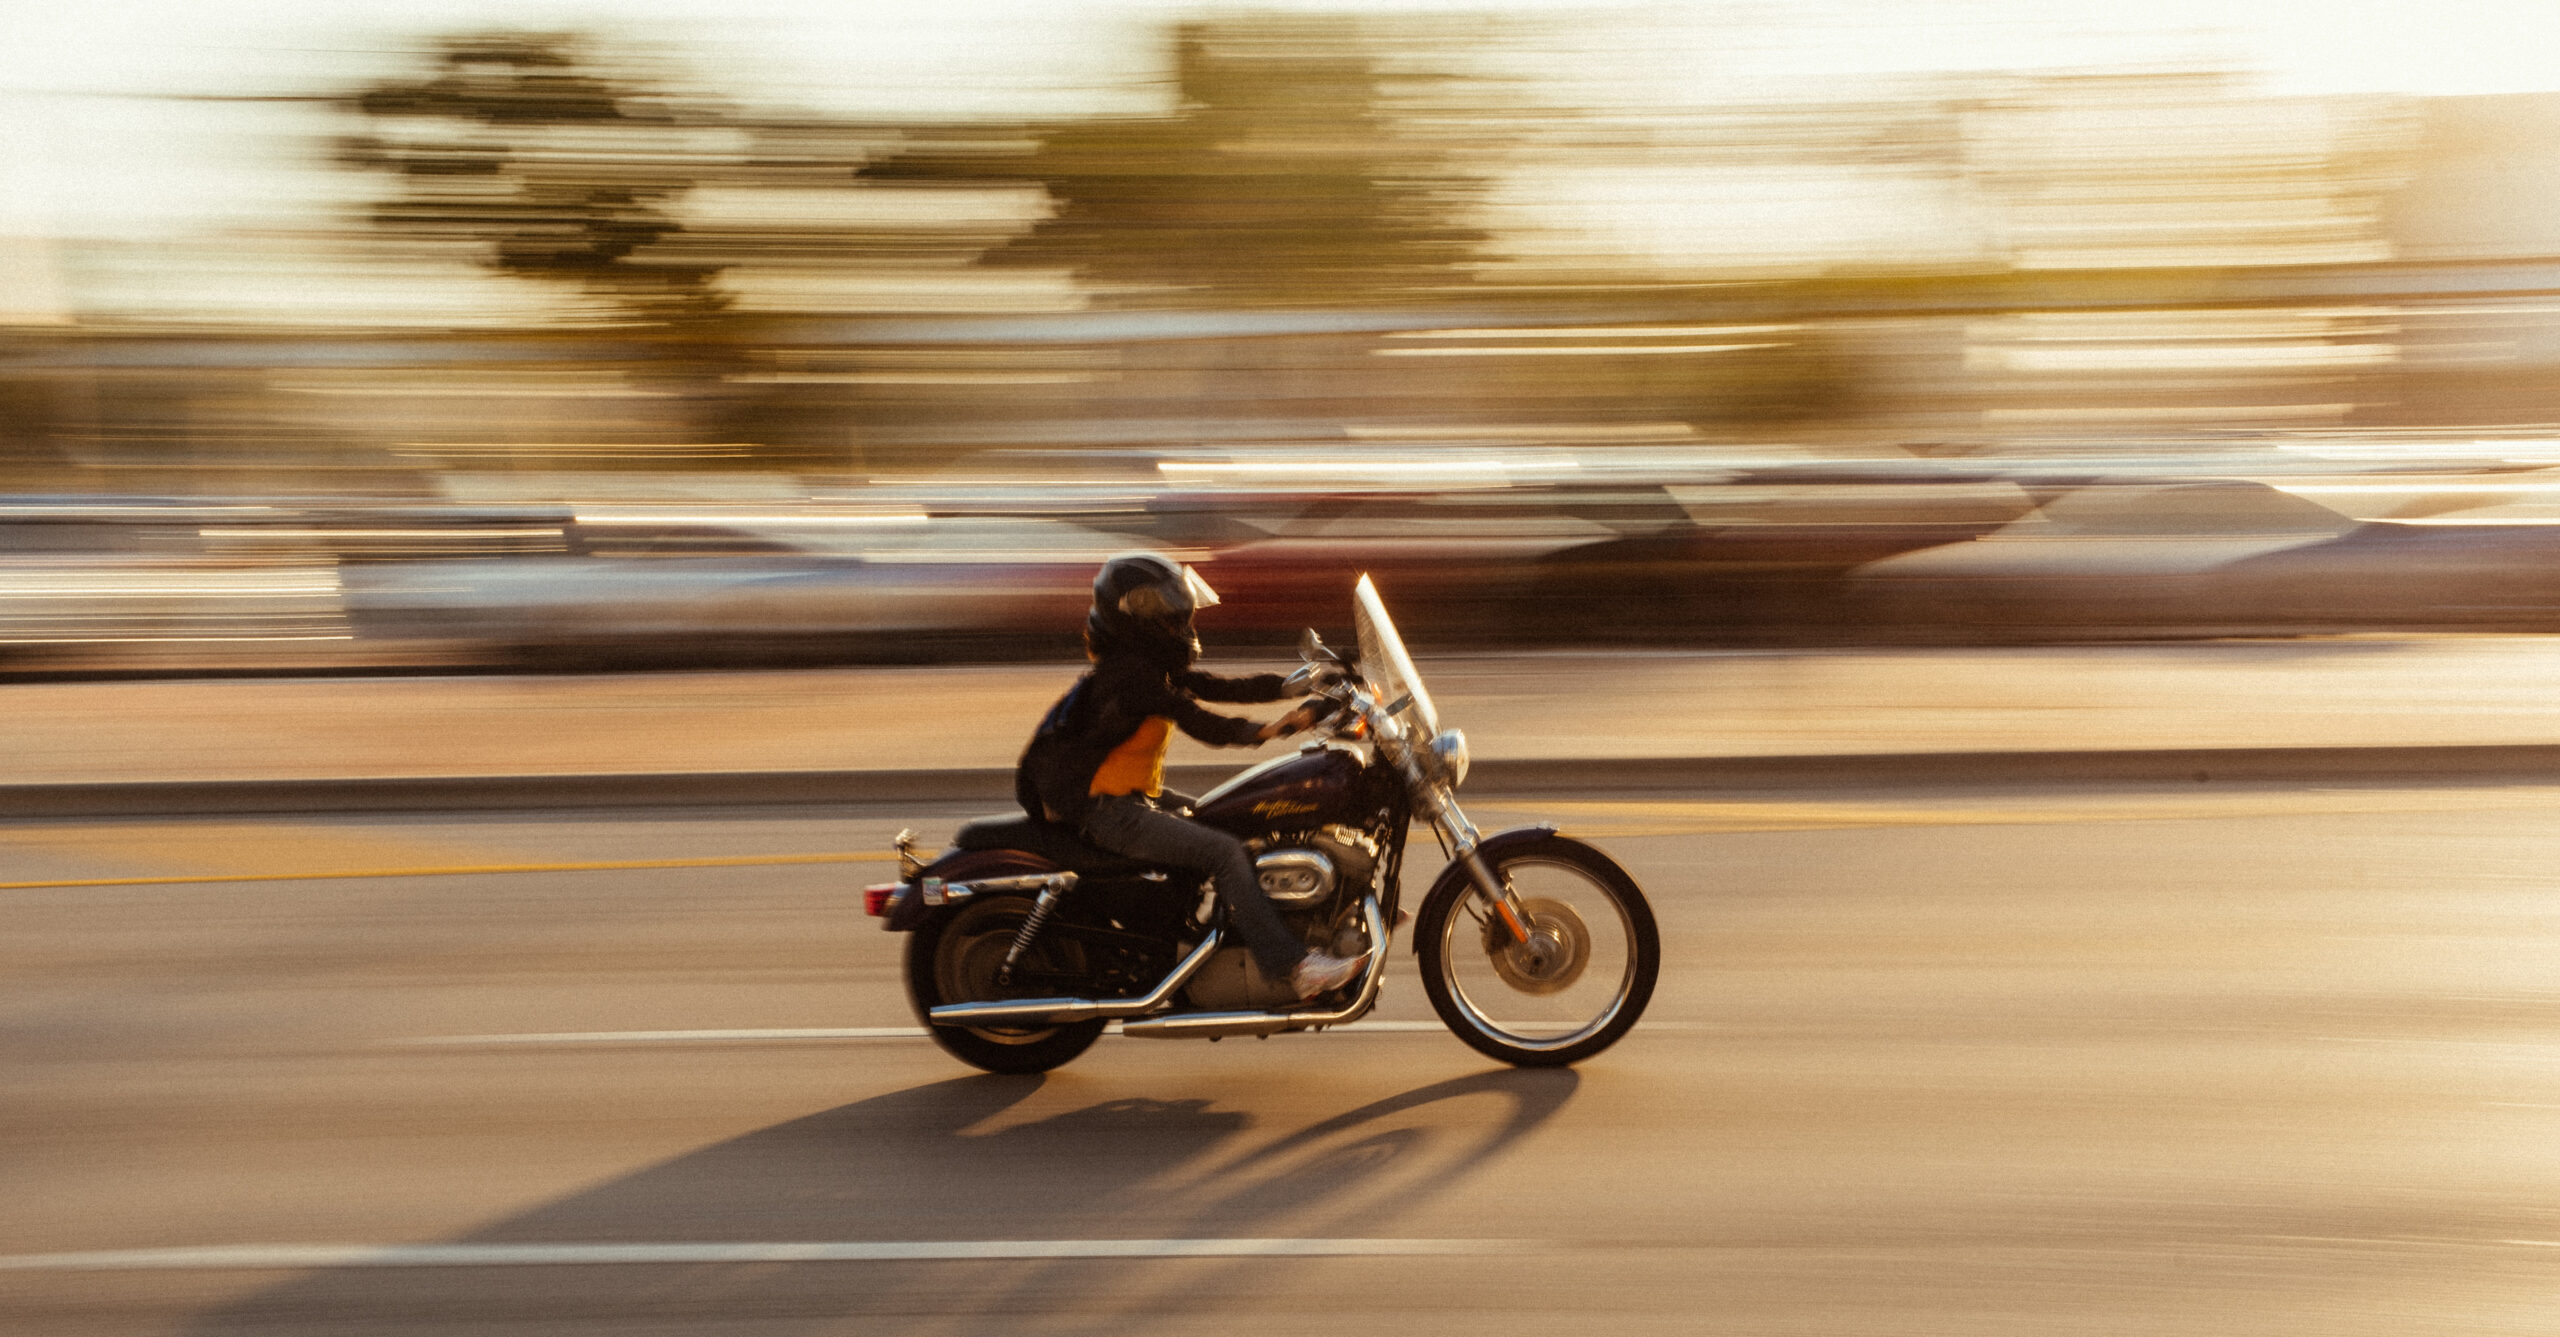 Your motorcycle as a business asset